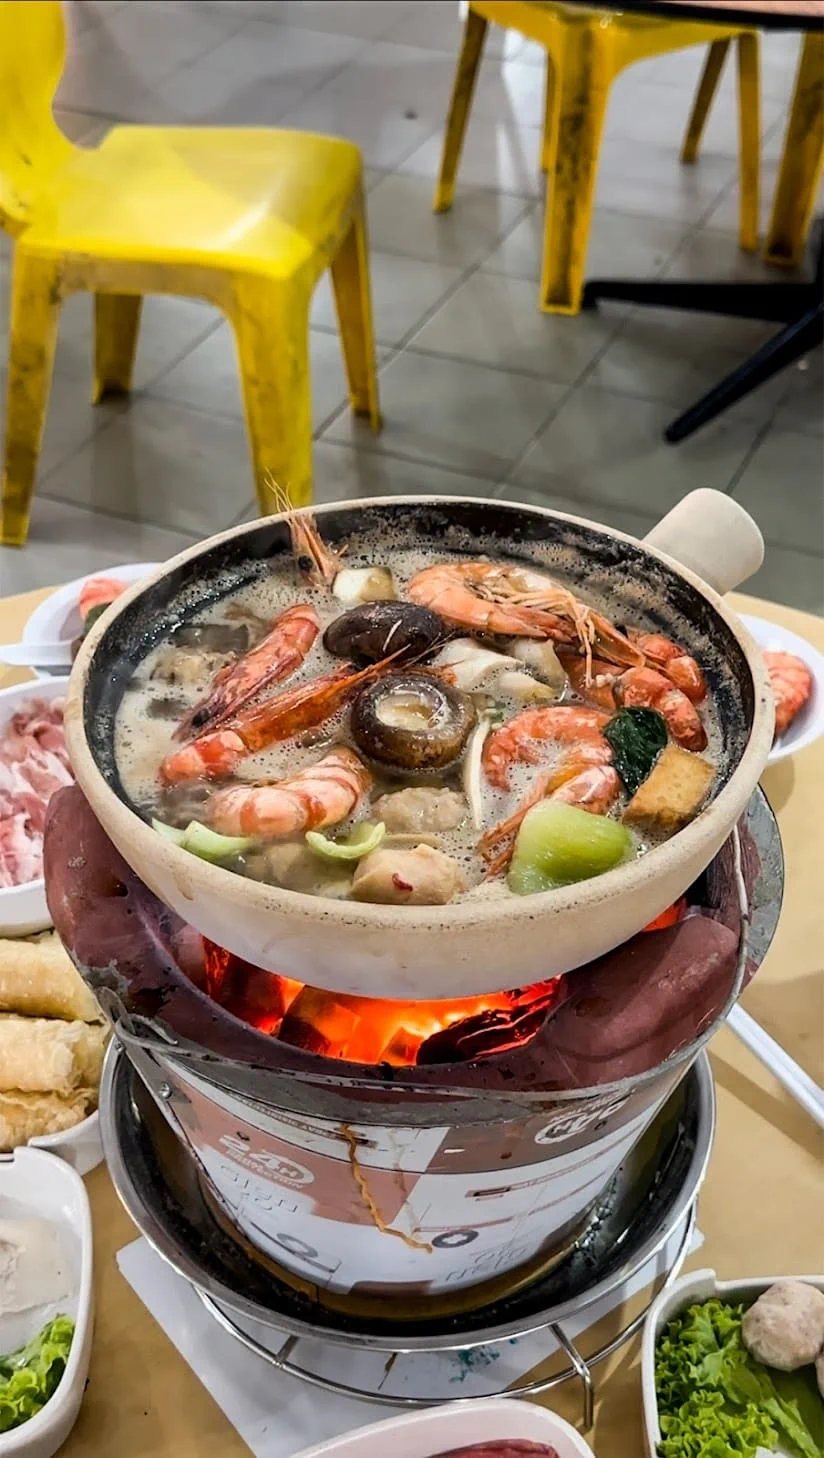 This Woodlands eatery has Singapore’s first charcoal claypot prawns with free-flow sauces, unlimited soup refills & “moonlight” Hokkien mee